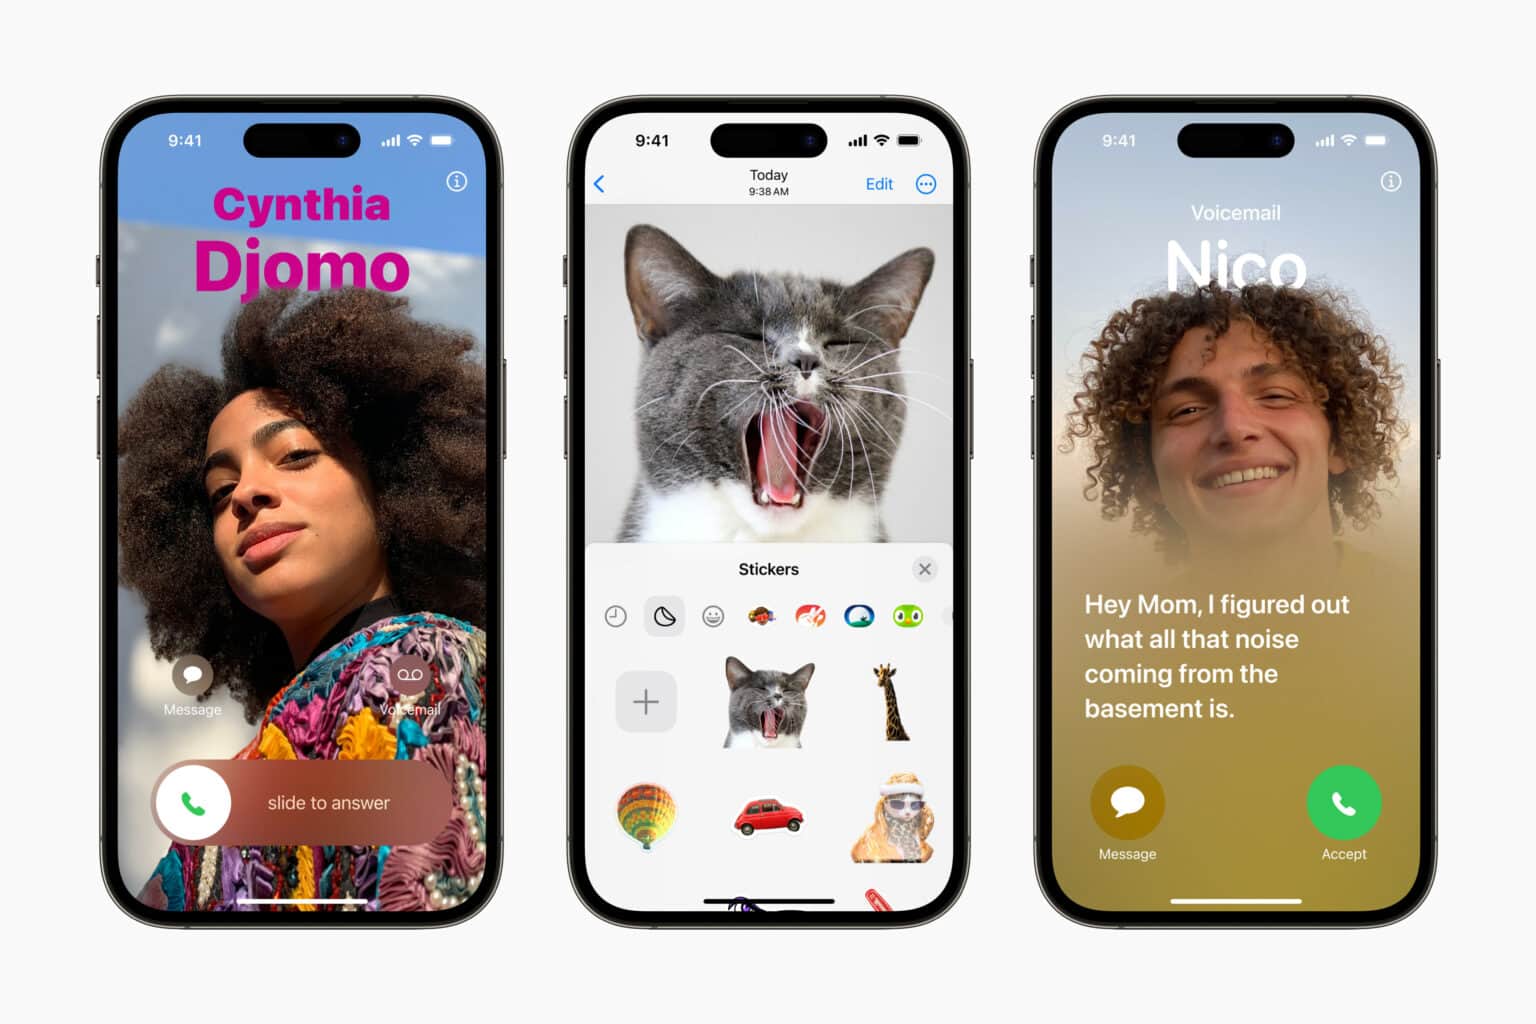 New contact posters, iMessage stickers and voicemail transcription